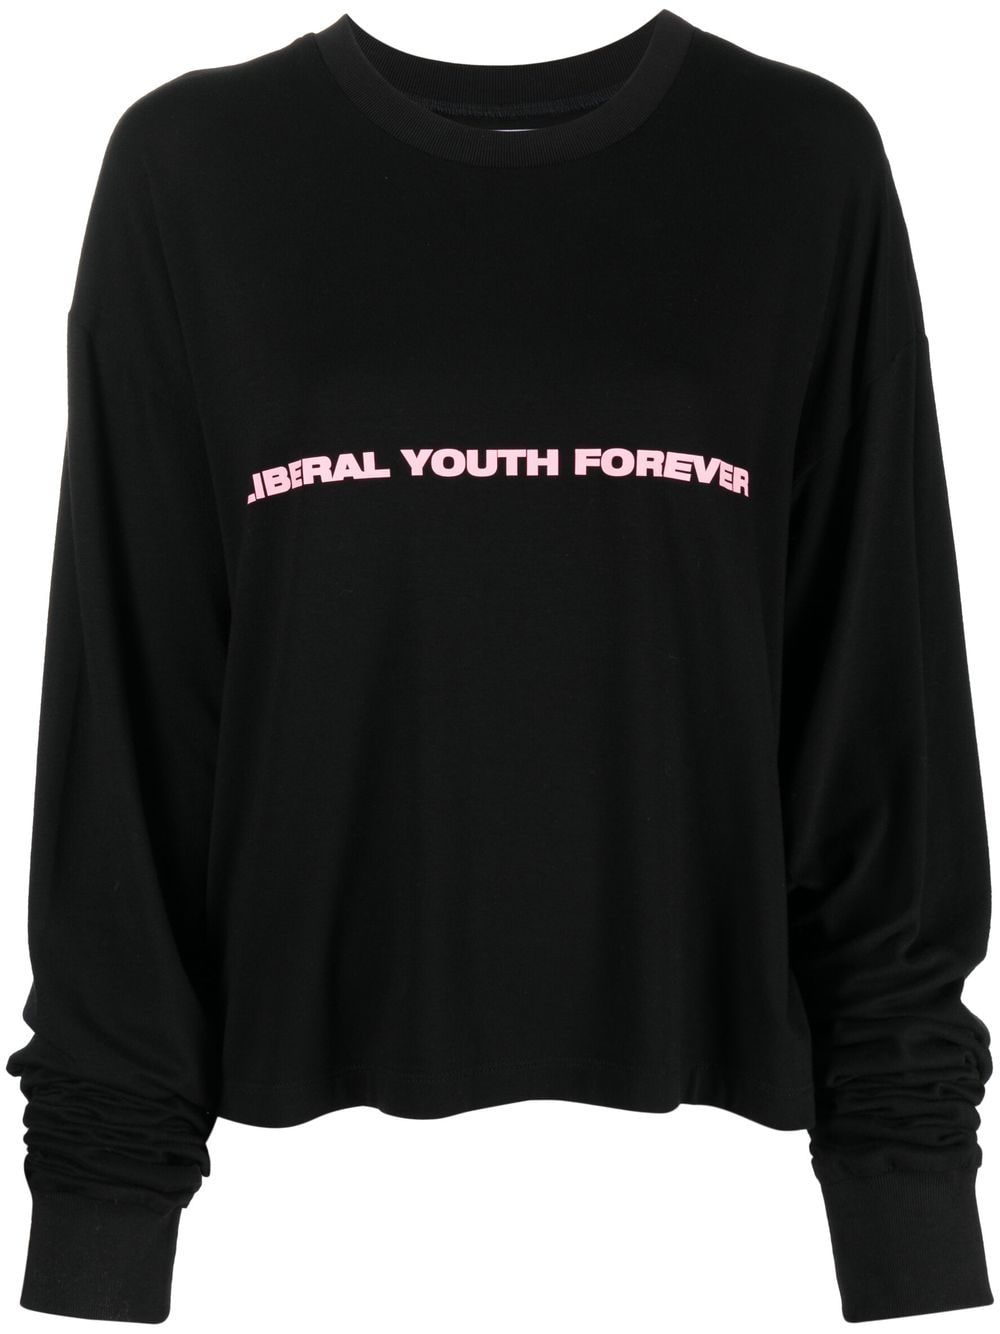 Liberal Youth Ministry Liberal Youth Forever sweater - Black von Liberal Youth Ministry